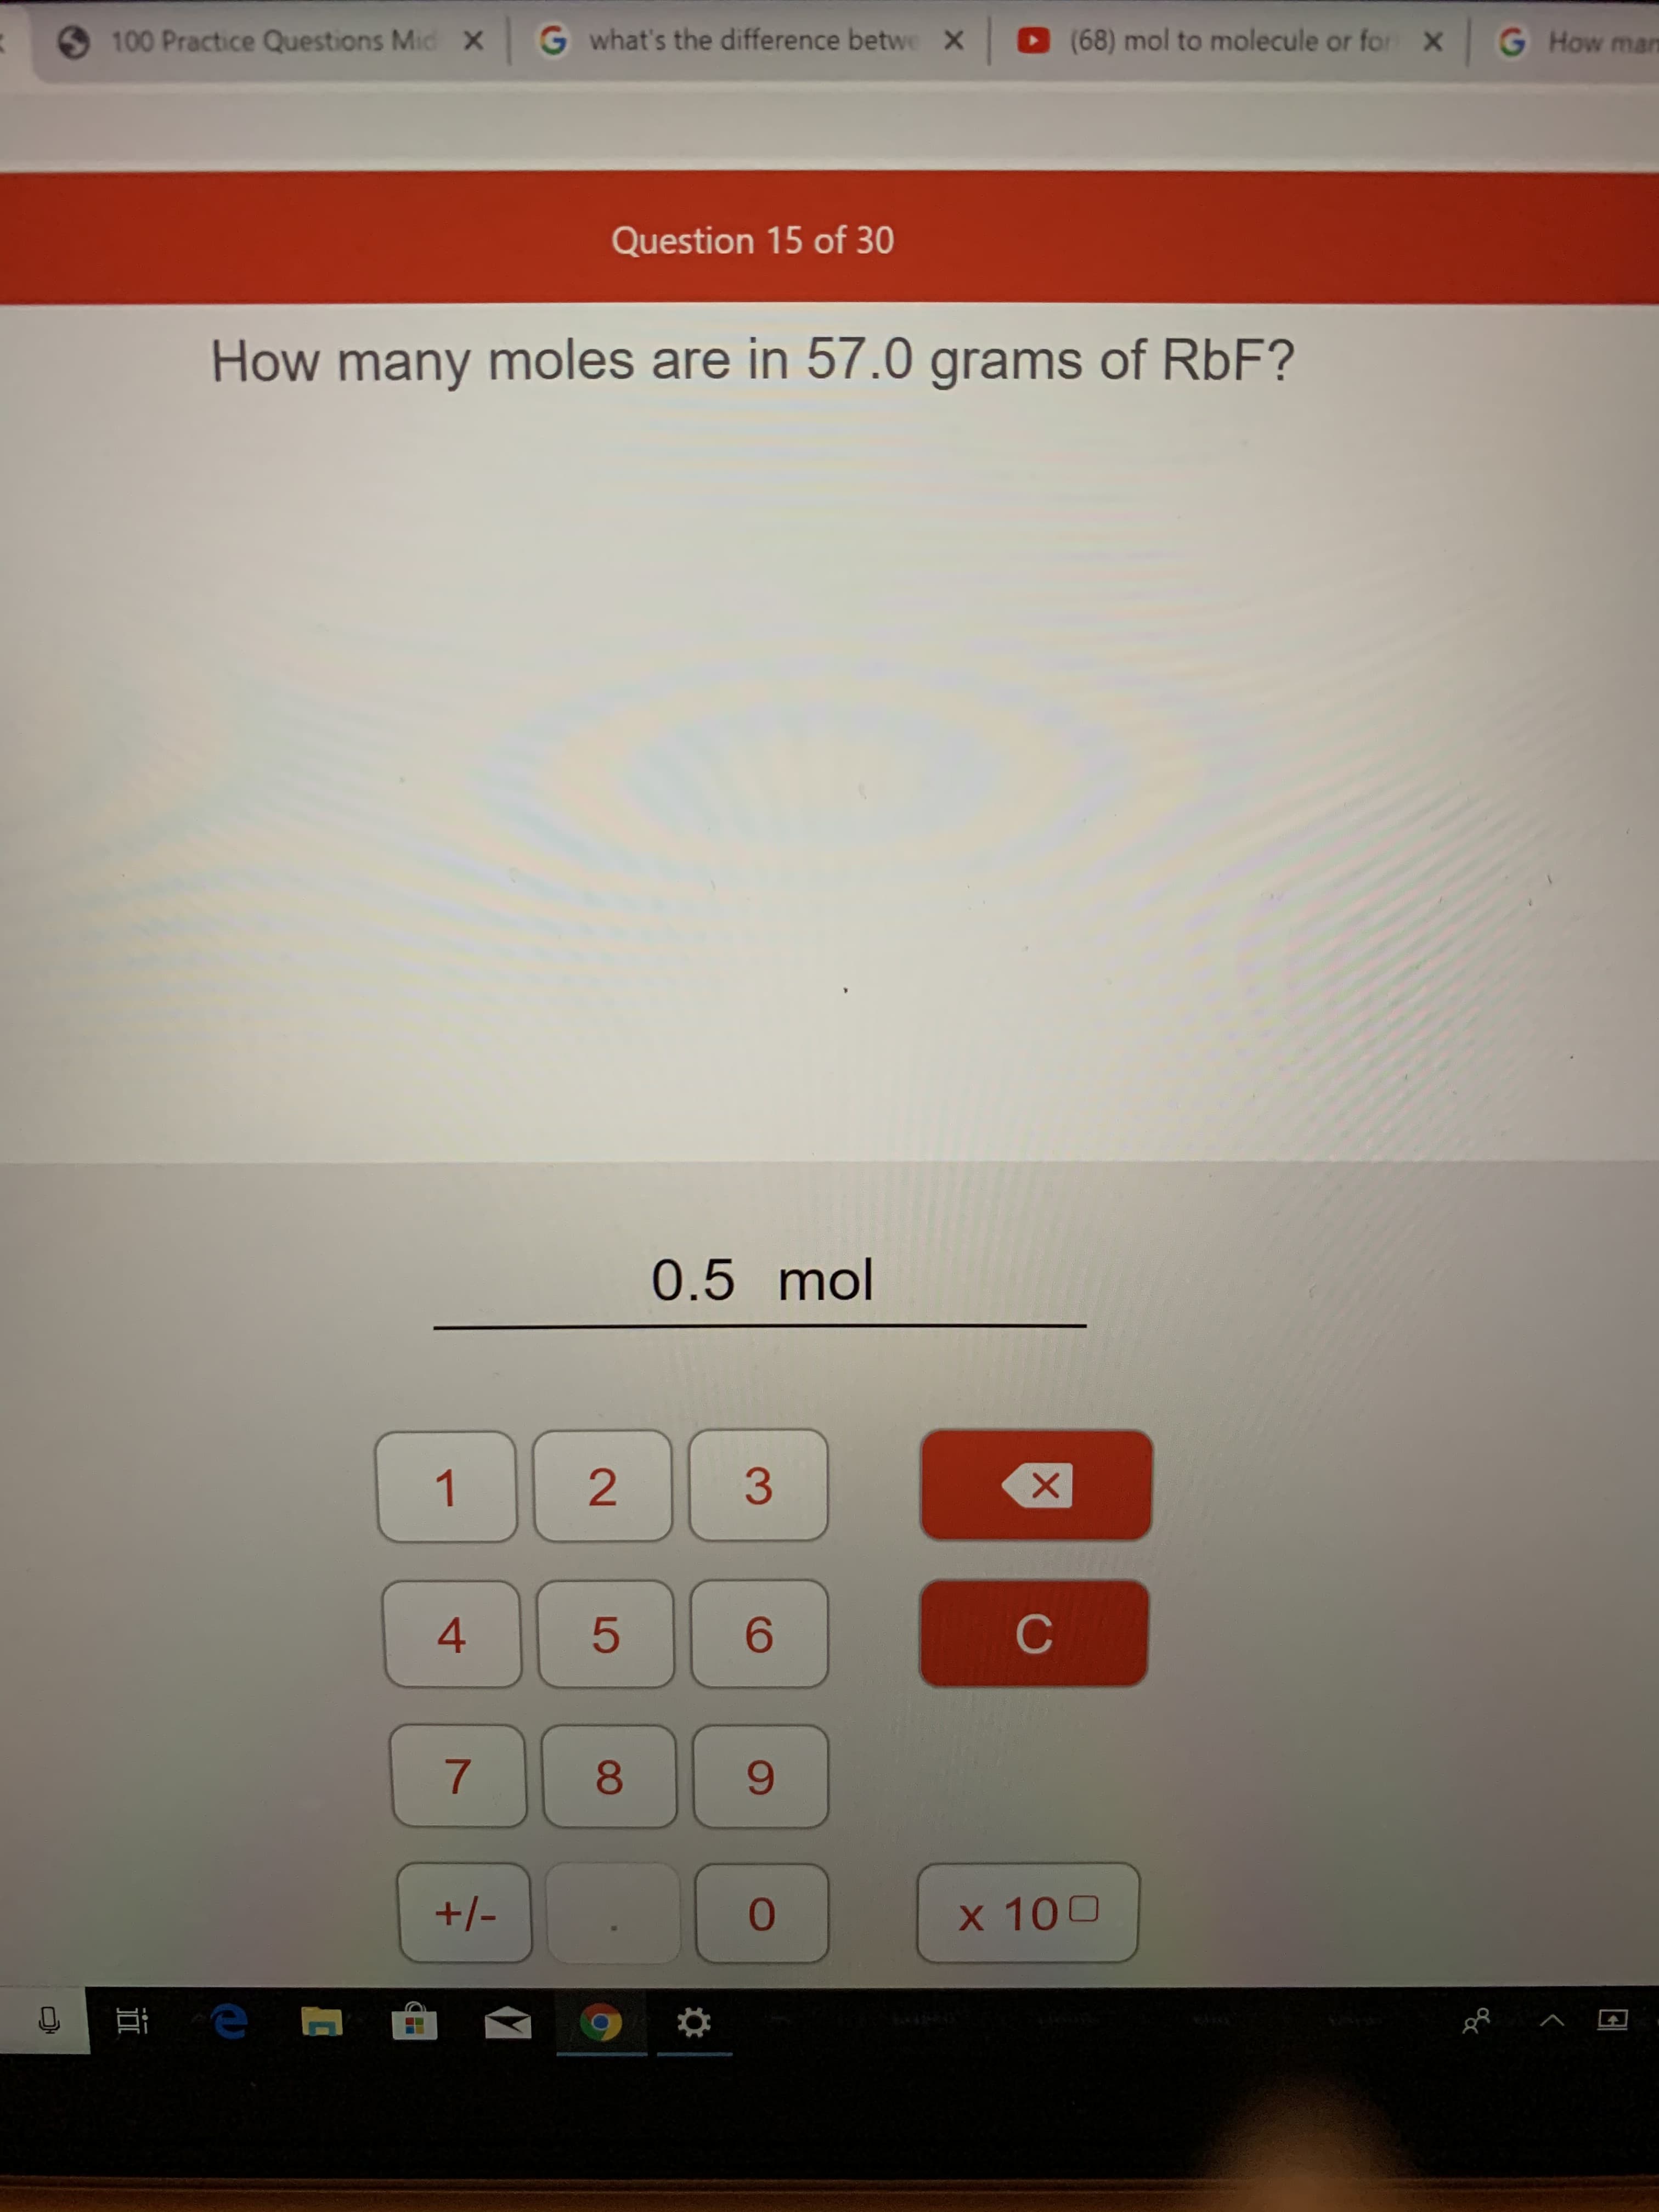 100 Practice Questions Mid X Gwhat's the difference betwe X
G How man
(68) mol to molecule or for
X
Question 15 of 30
How many moles are in 57.0 grams of RbF?
0.5 mol
3
2
1
C
4
5
7
+1-
0
100
X
